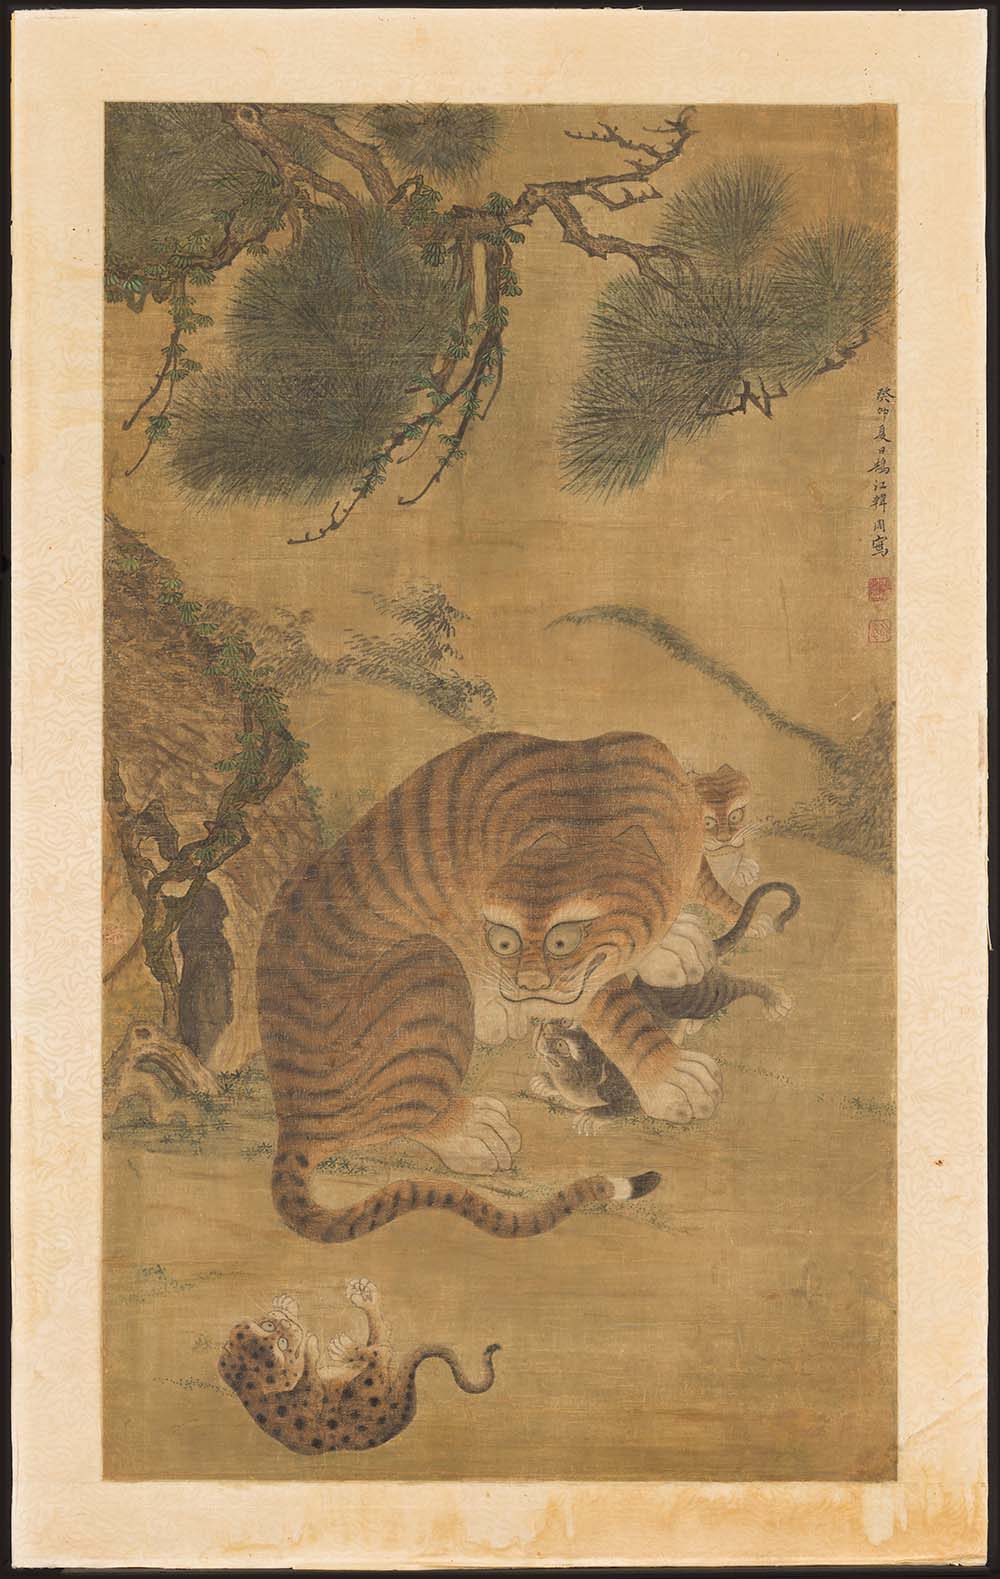 Unidentified Artist (Korean), Tiger and Cubs, 18th century, hanging scroll, ink and colors on silk, Museum Purchase, Lee Cowan Fund for Asian Art, 2019.177